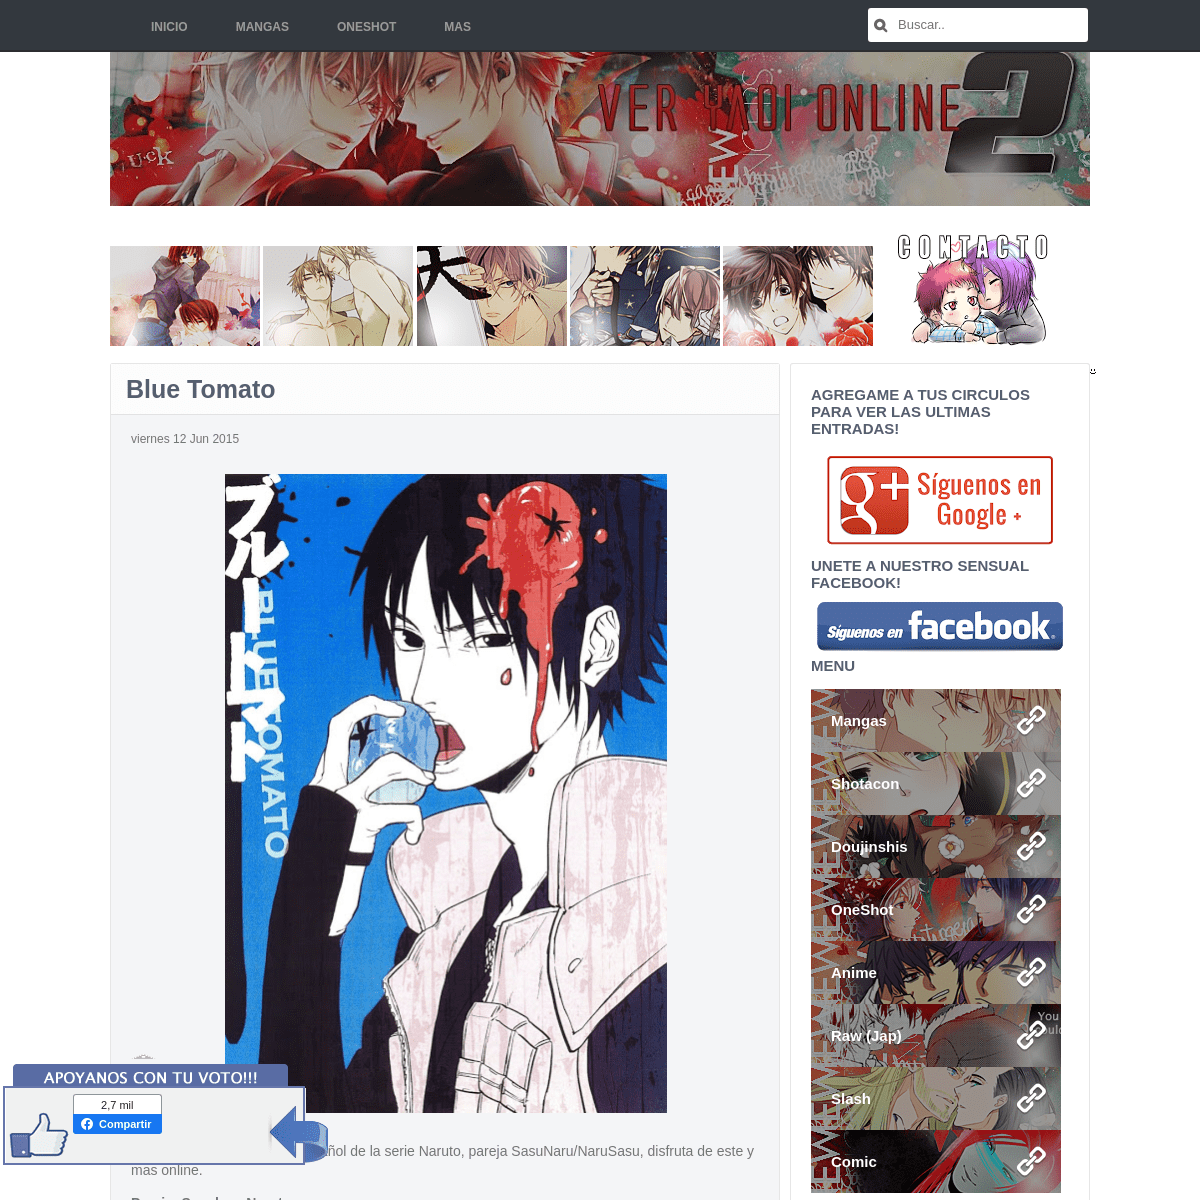 A complete backup of http://veryaoionline.net/2015/06/blue-tomato.html